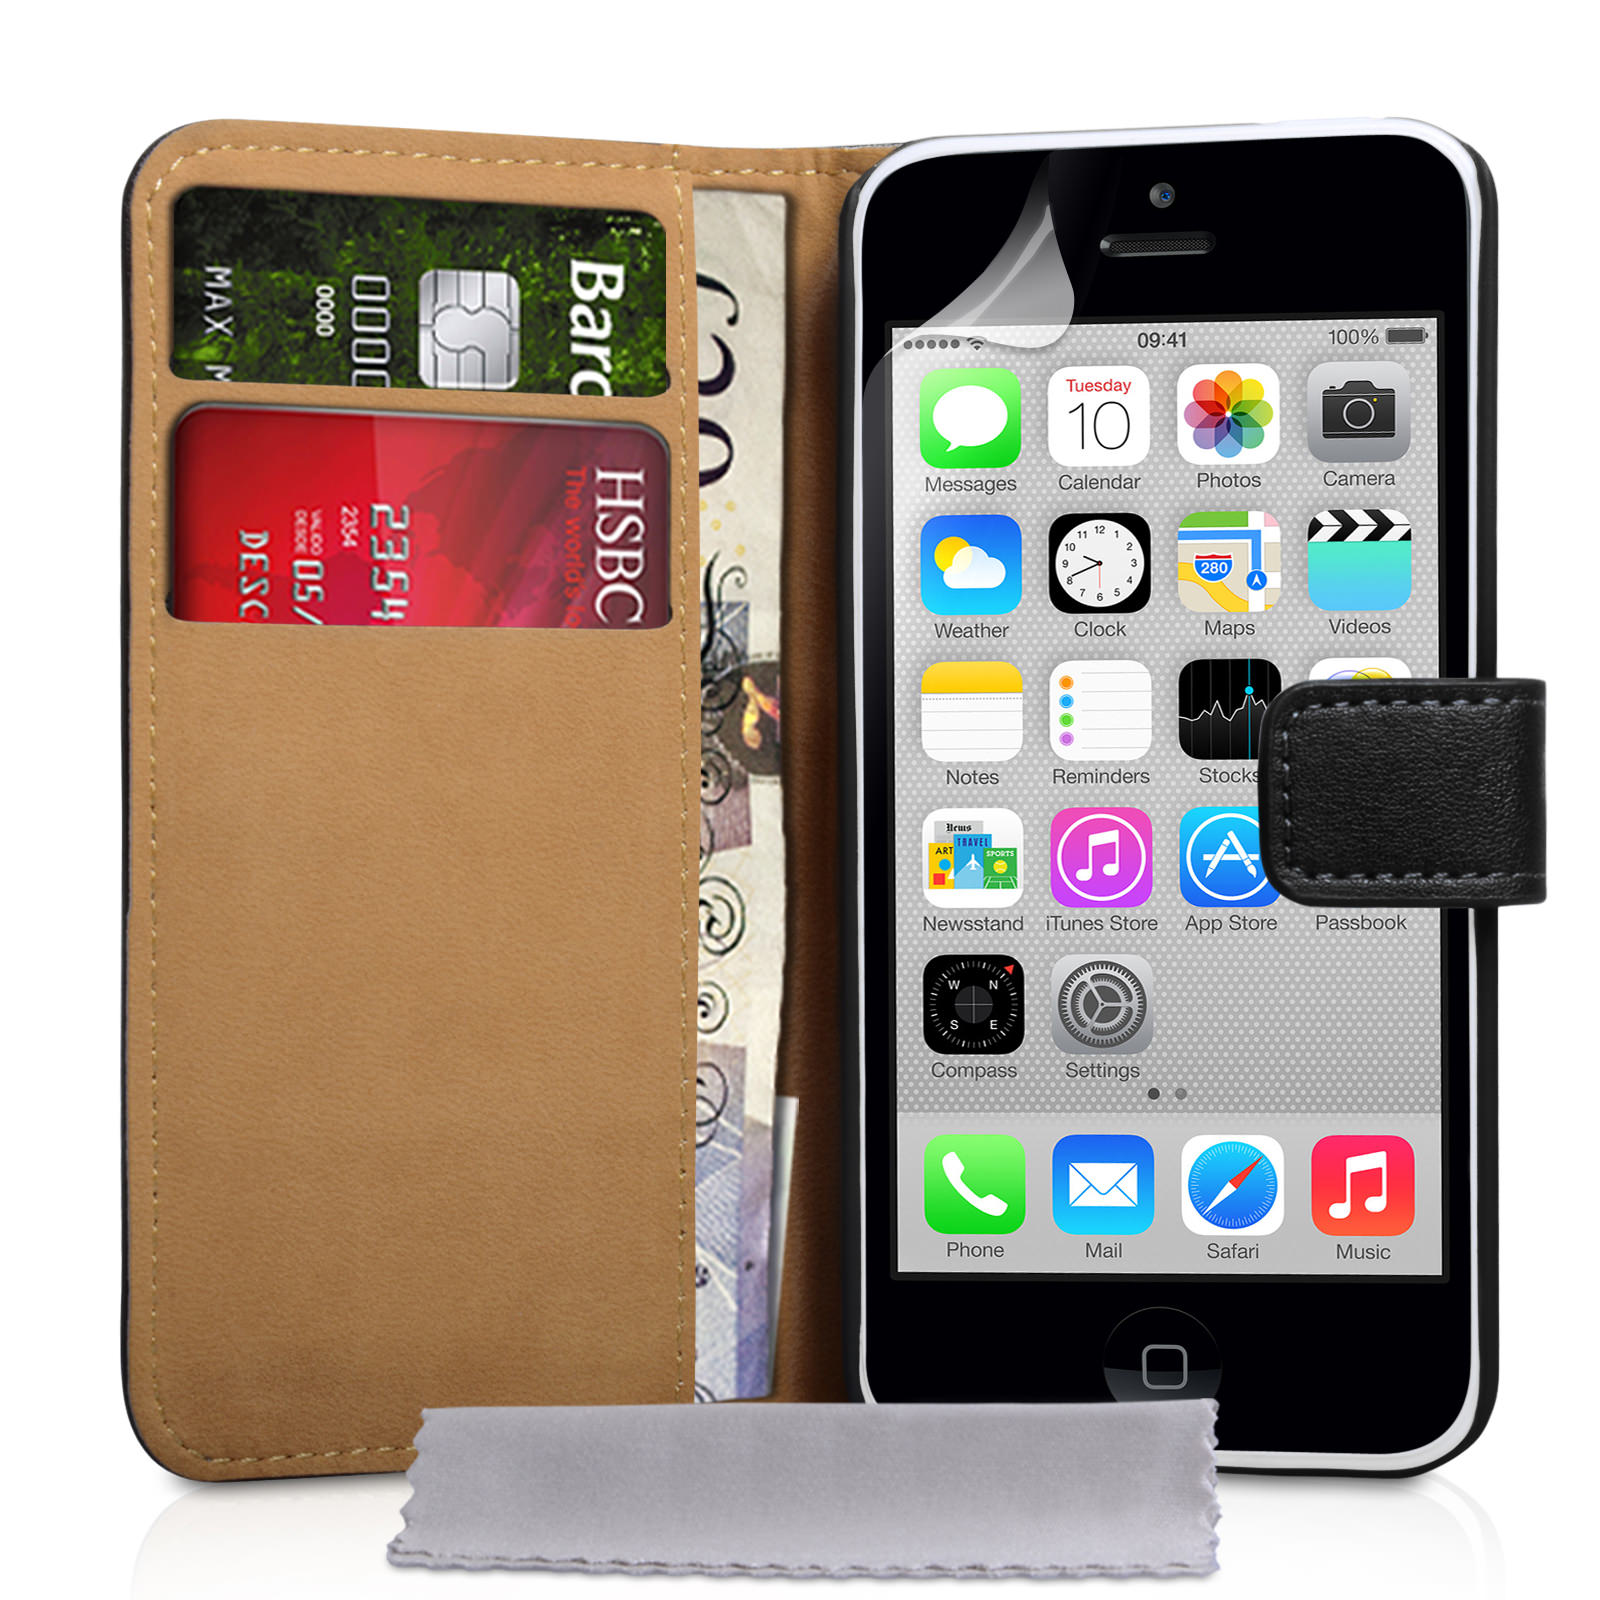 Yousave Accessories iPhone 5C Real Leather Wallet Stand Case - Black